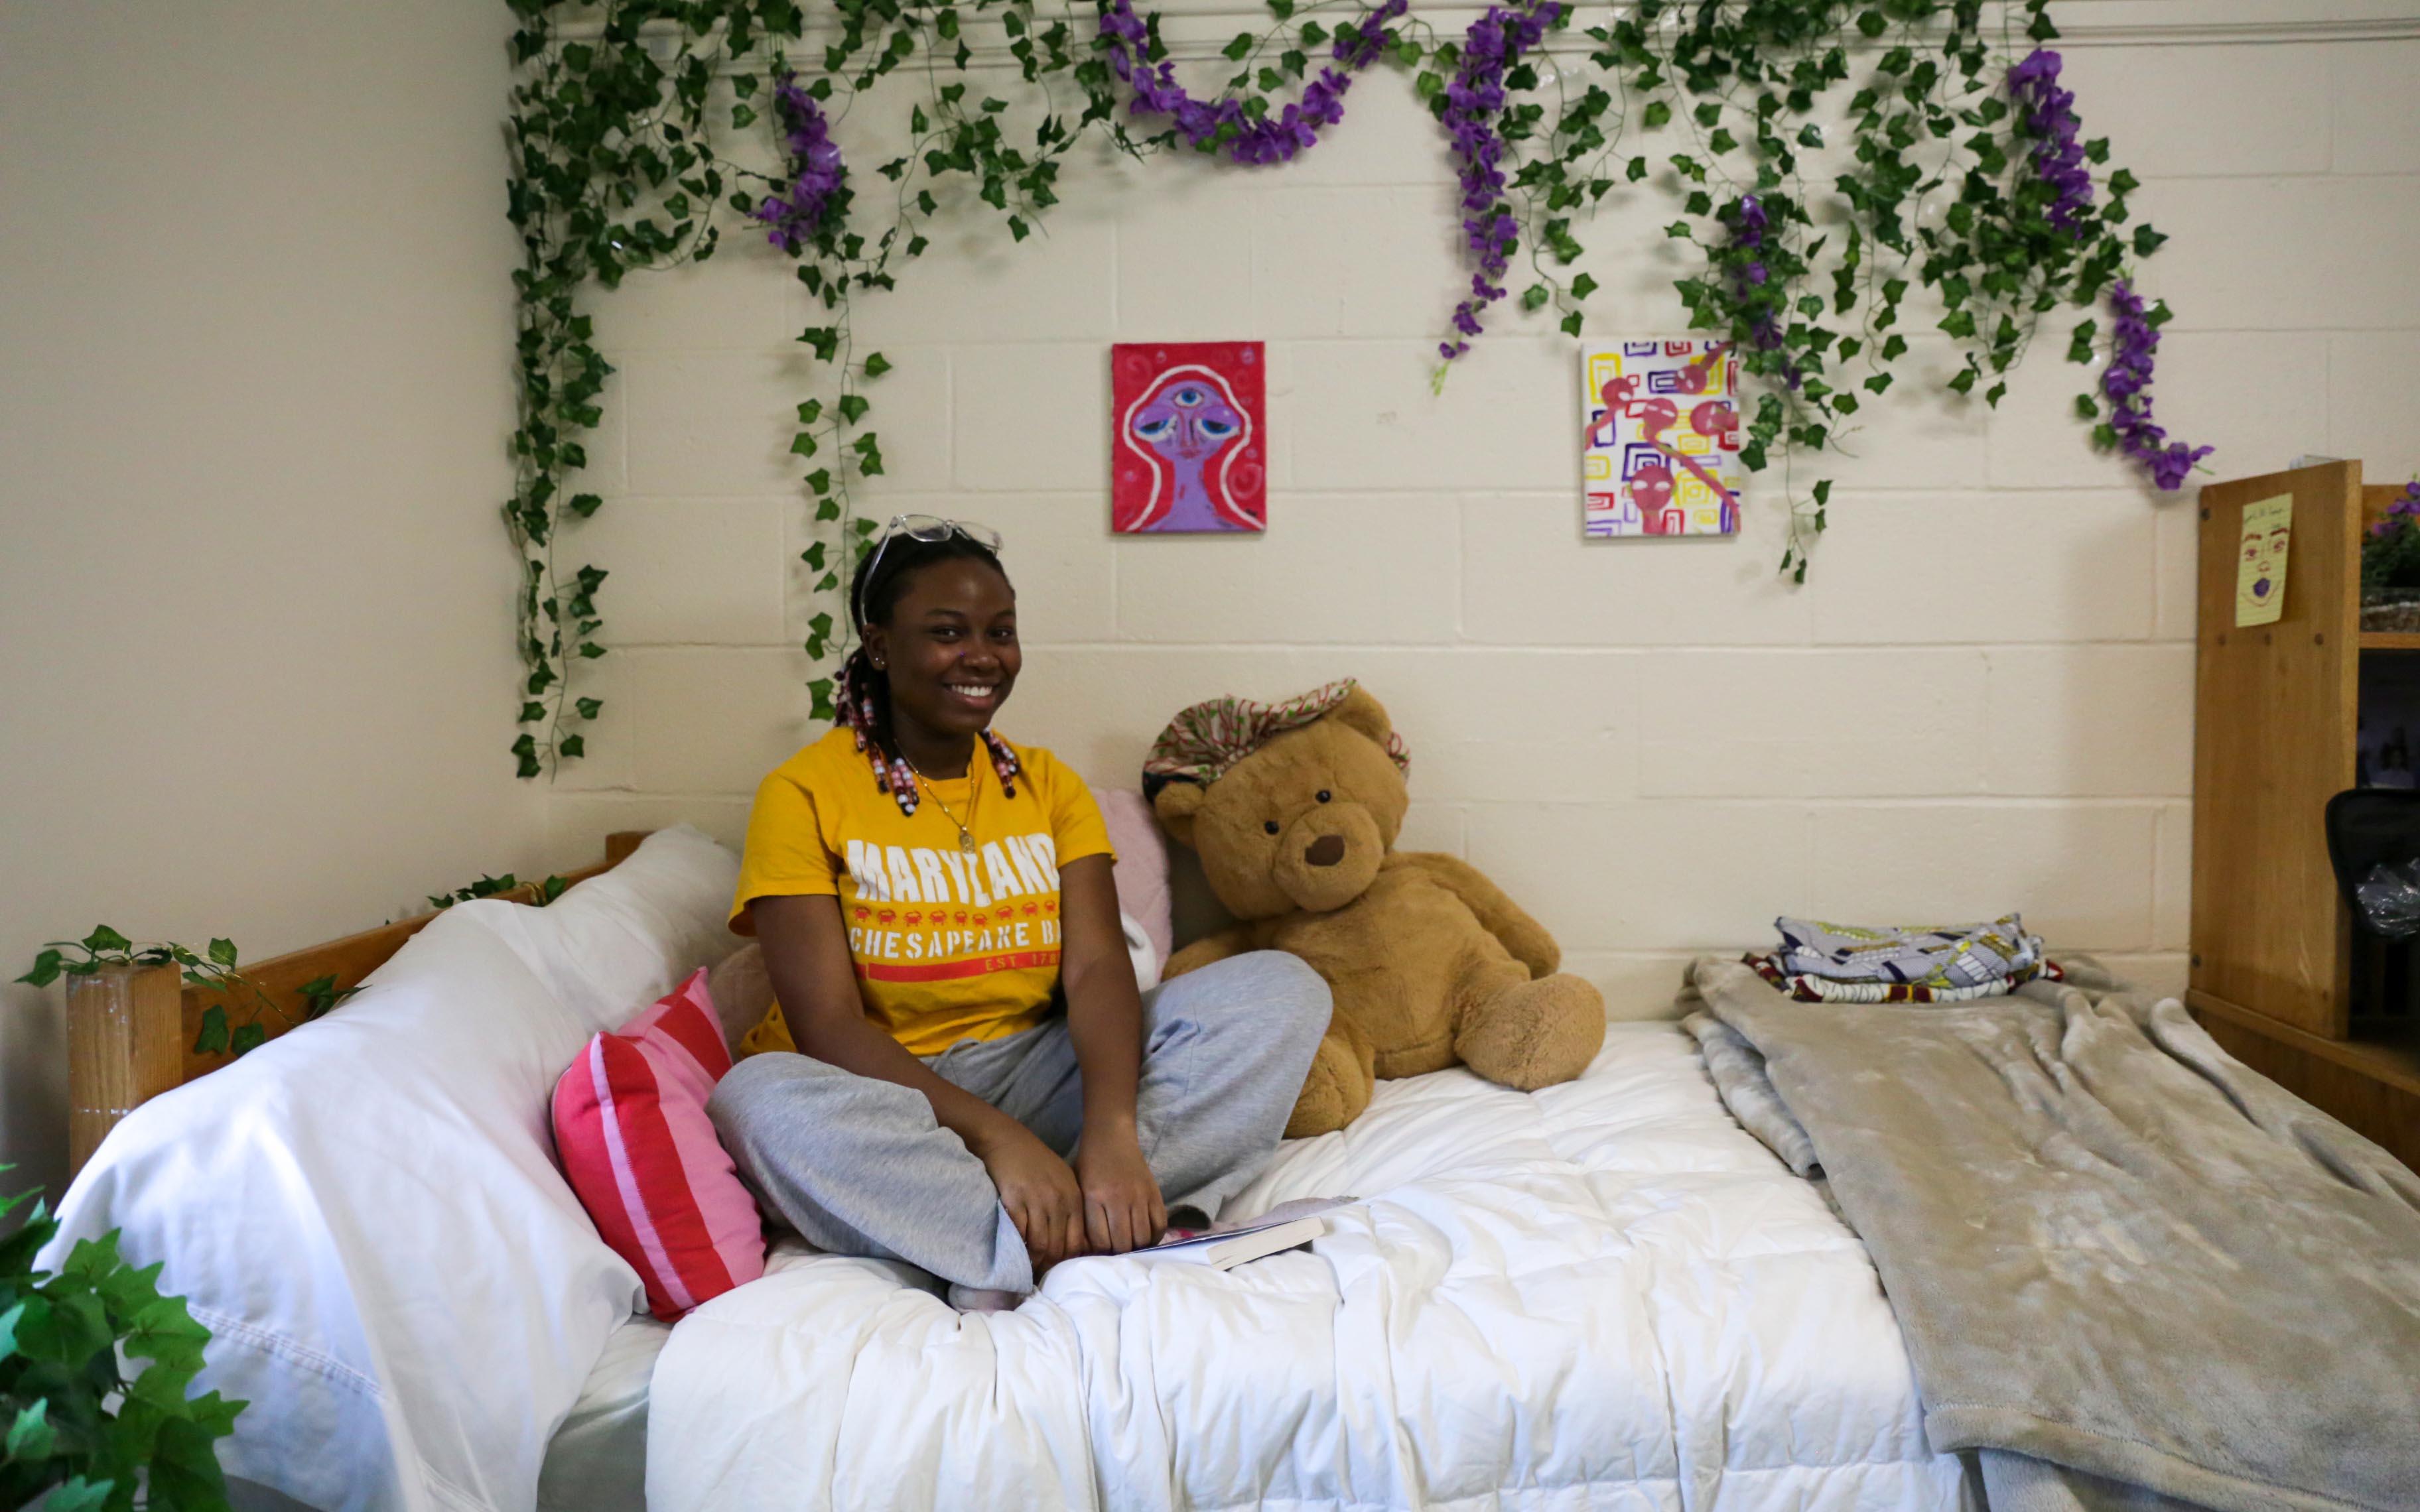 student sitting on her bed decorated with blanket and teddy bear in residence hall room, hanging wall plants in the background 